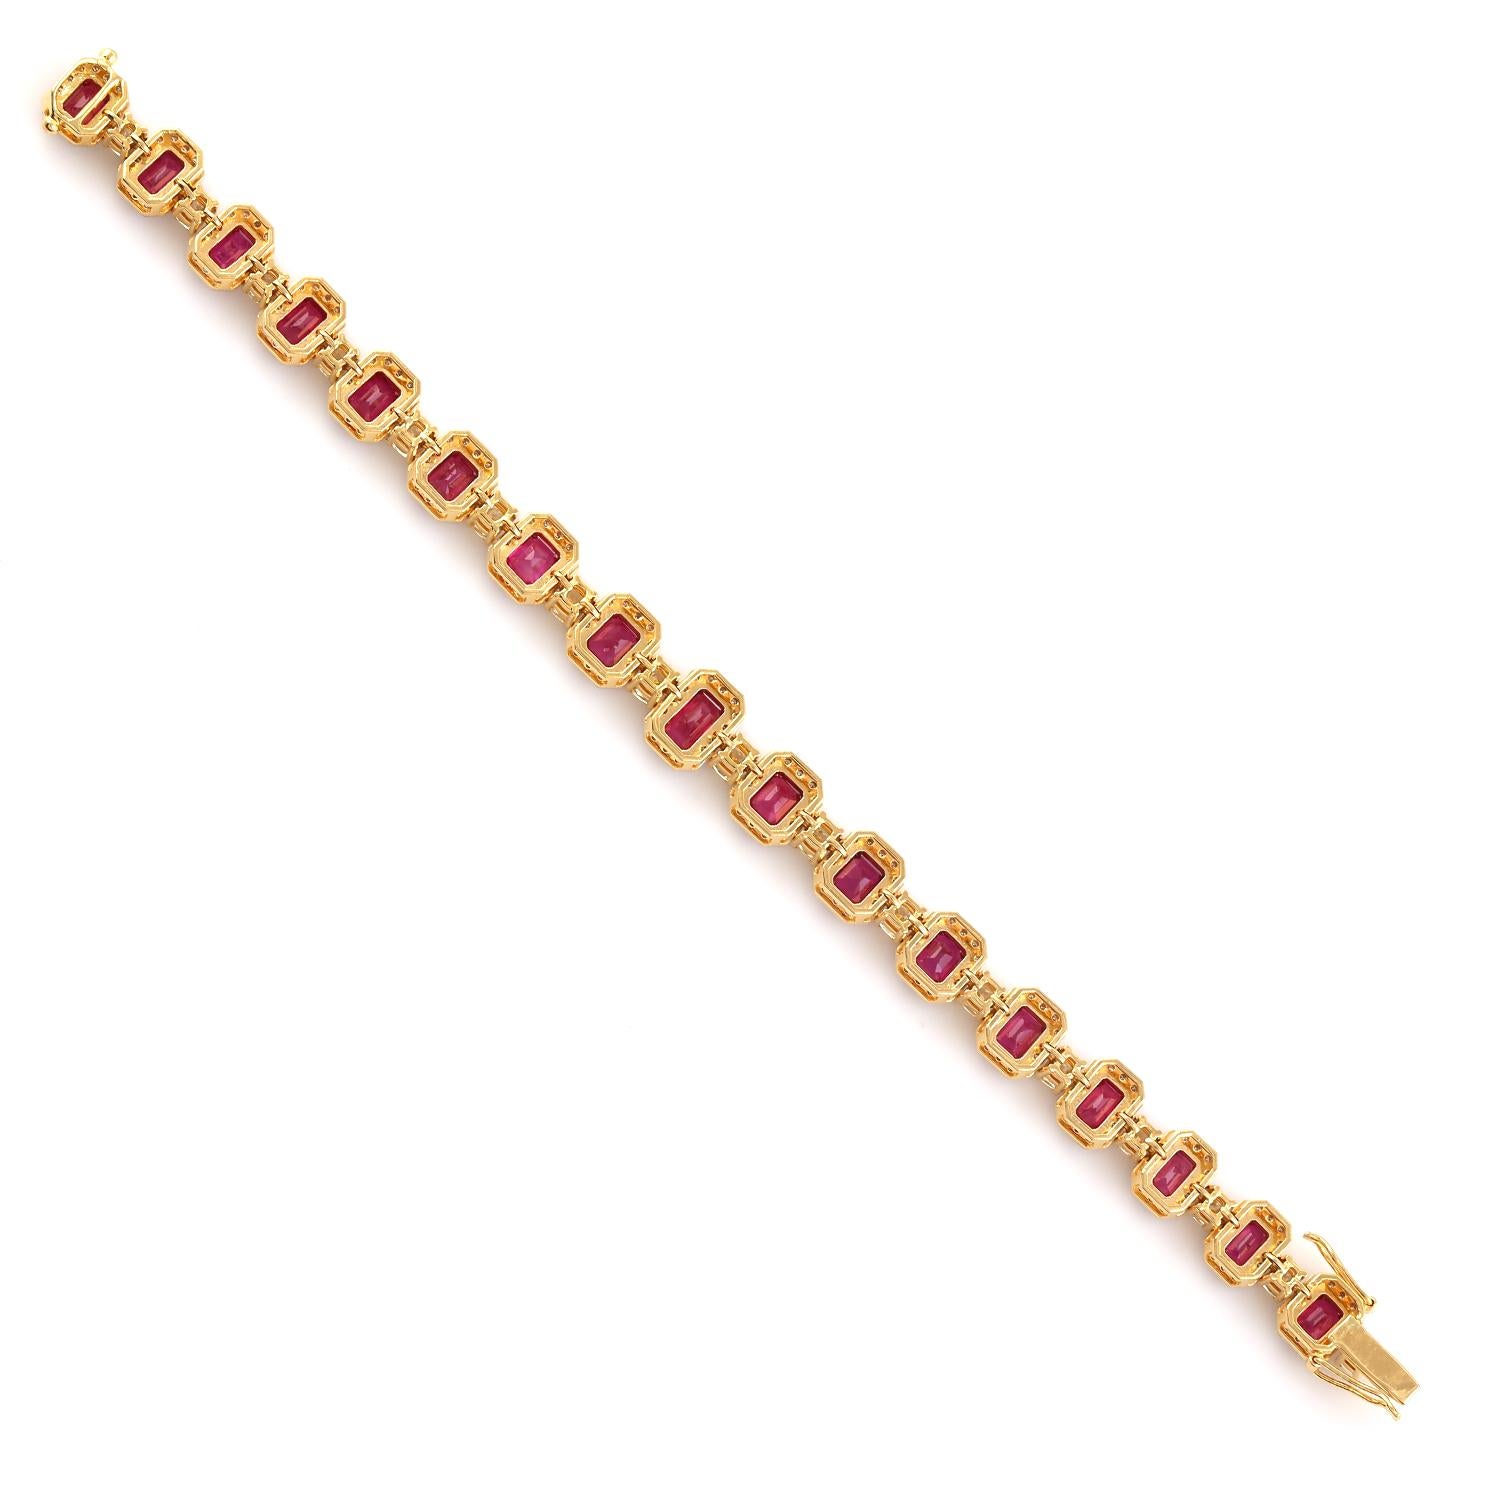 Classic Emerald Cut Ruby Tennis Bracelet with Diamonds Made in 18K Yellow Gold In New Condition For Sale In New York, NY